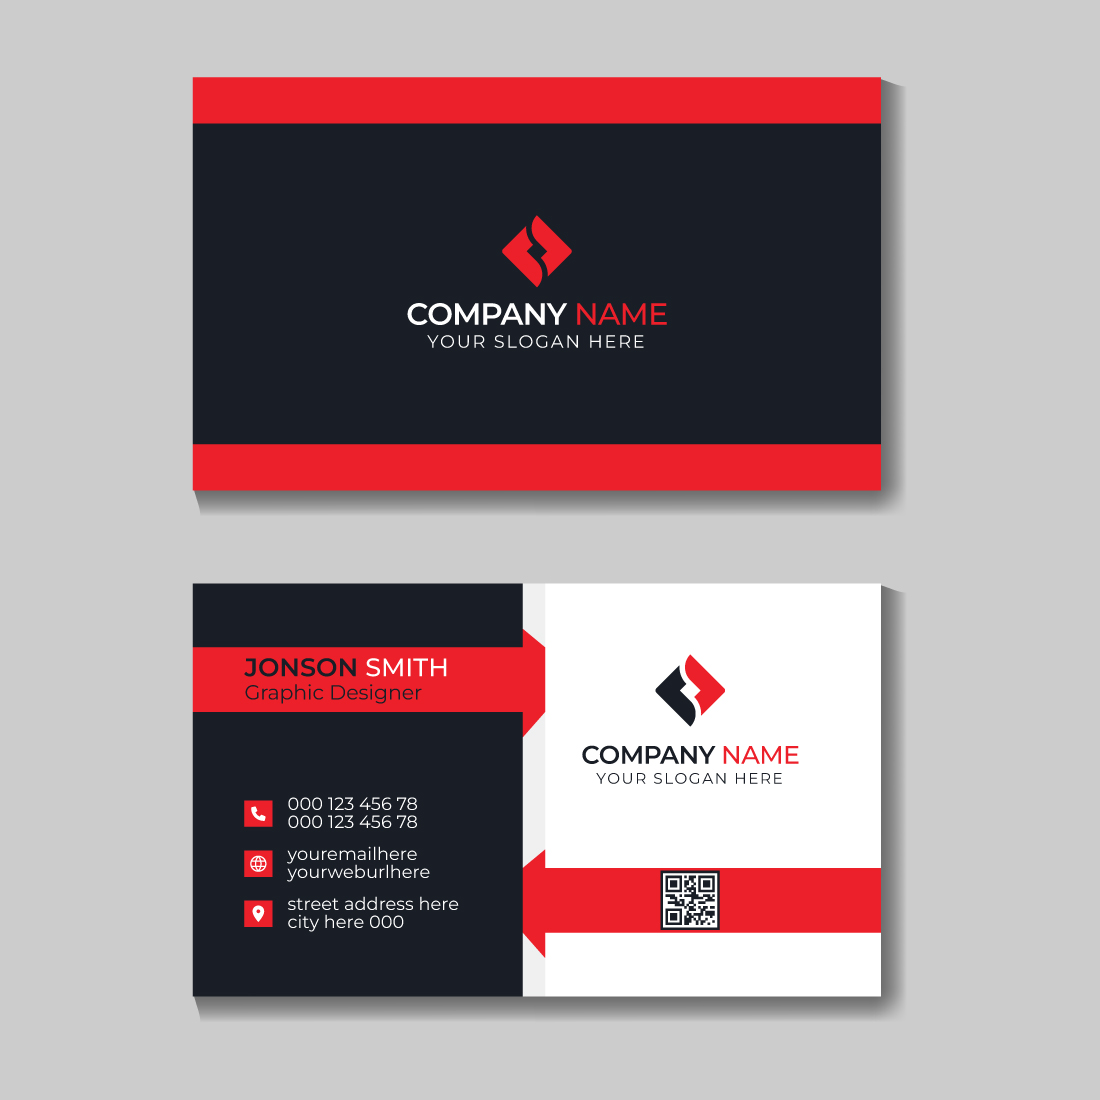 red color 4 Colors Corporate Minimal Creative Business Card Design Template.